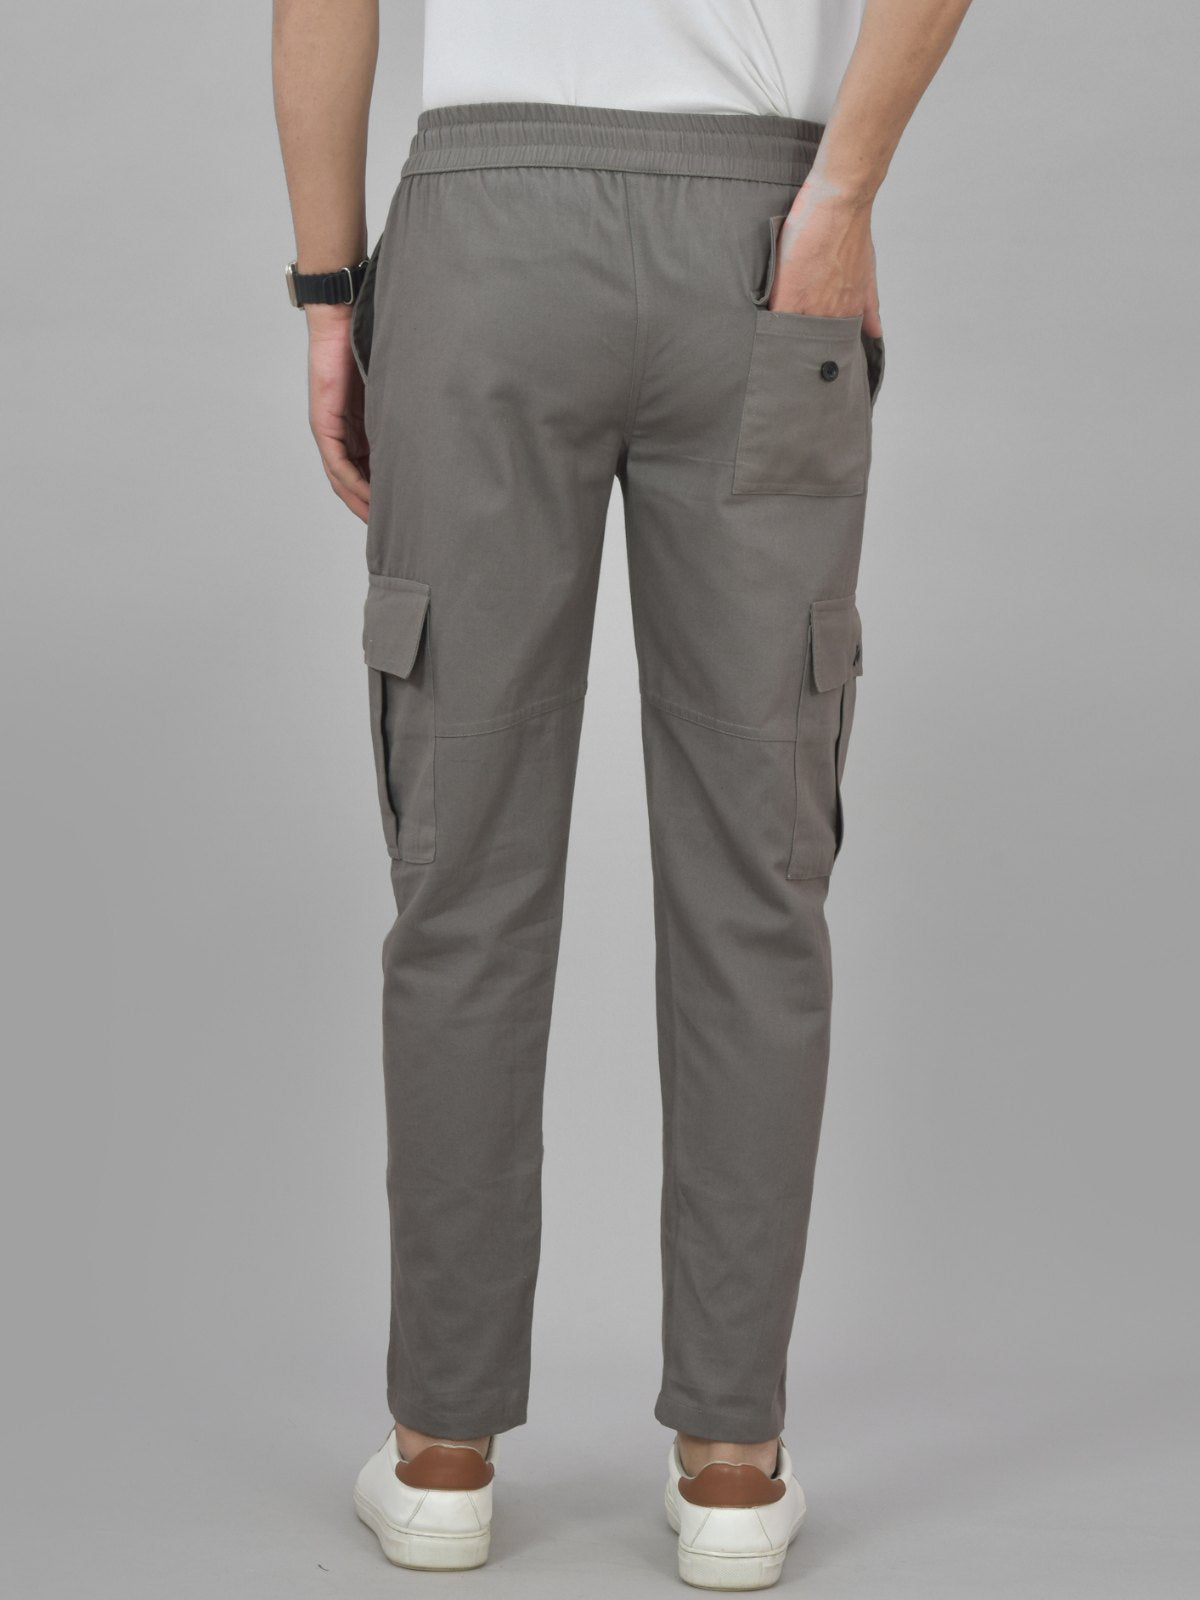 Pack Of 2 Mens Grey And Blue Twill Straight Cargo Pants Combo